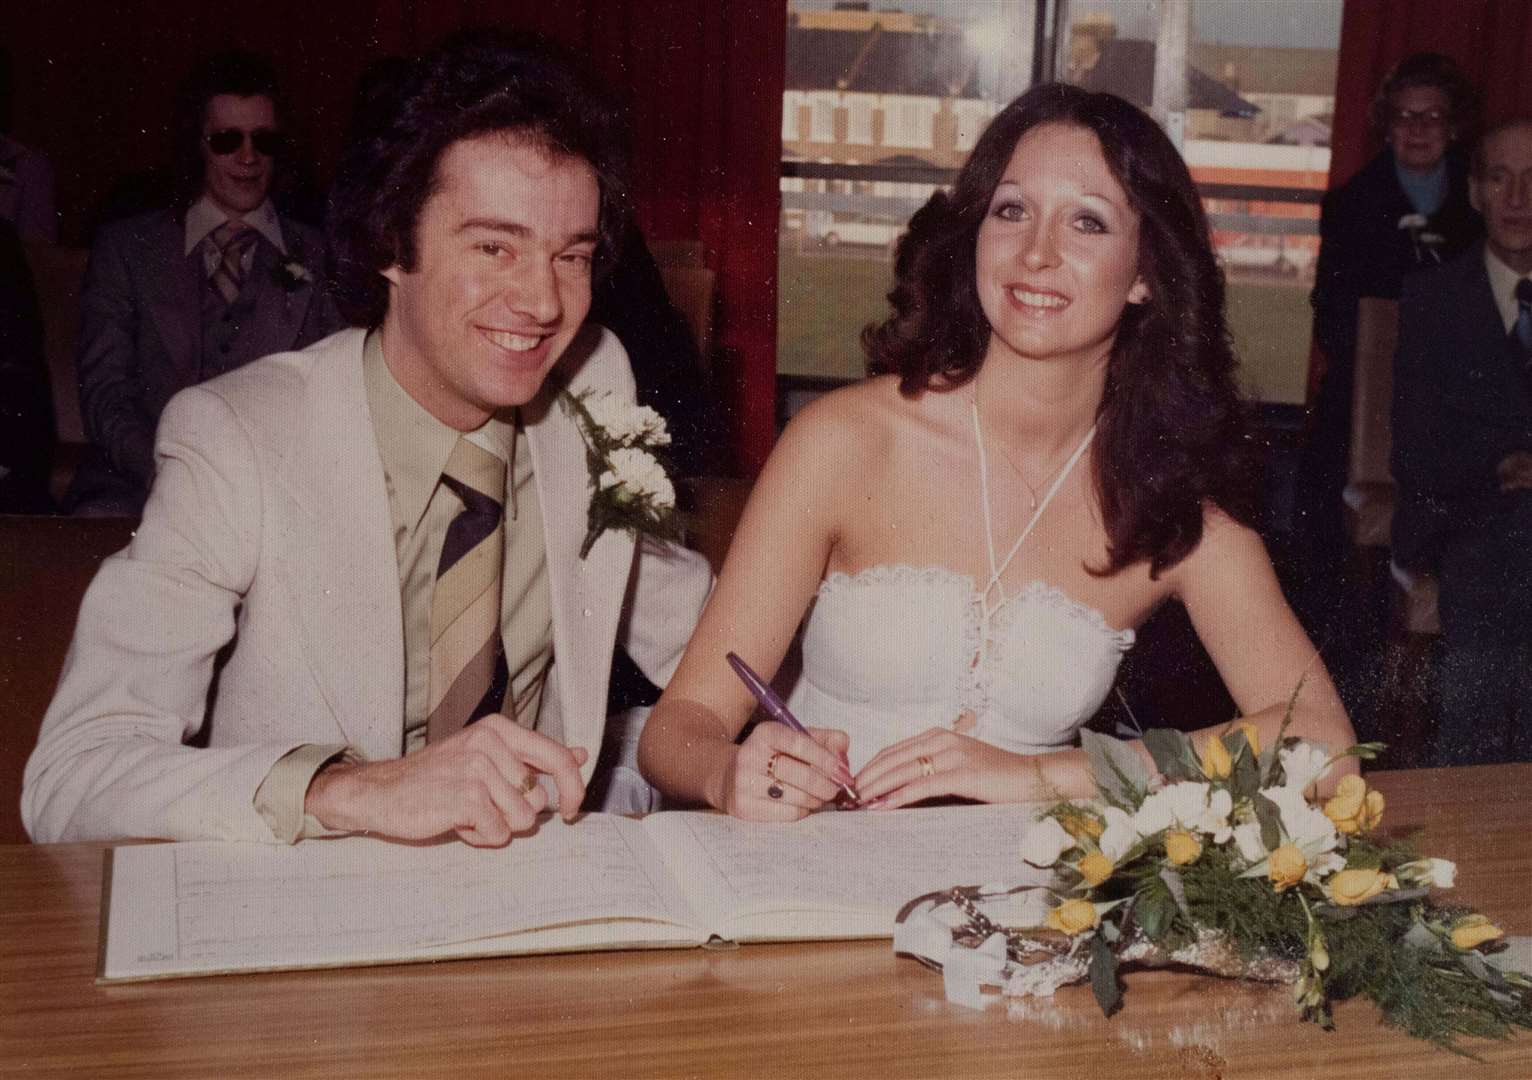 Dave Harvey on his wedding day in 1976 with his wife Anne. Picture: SWNS